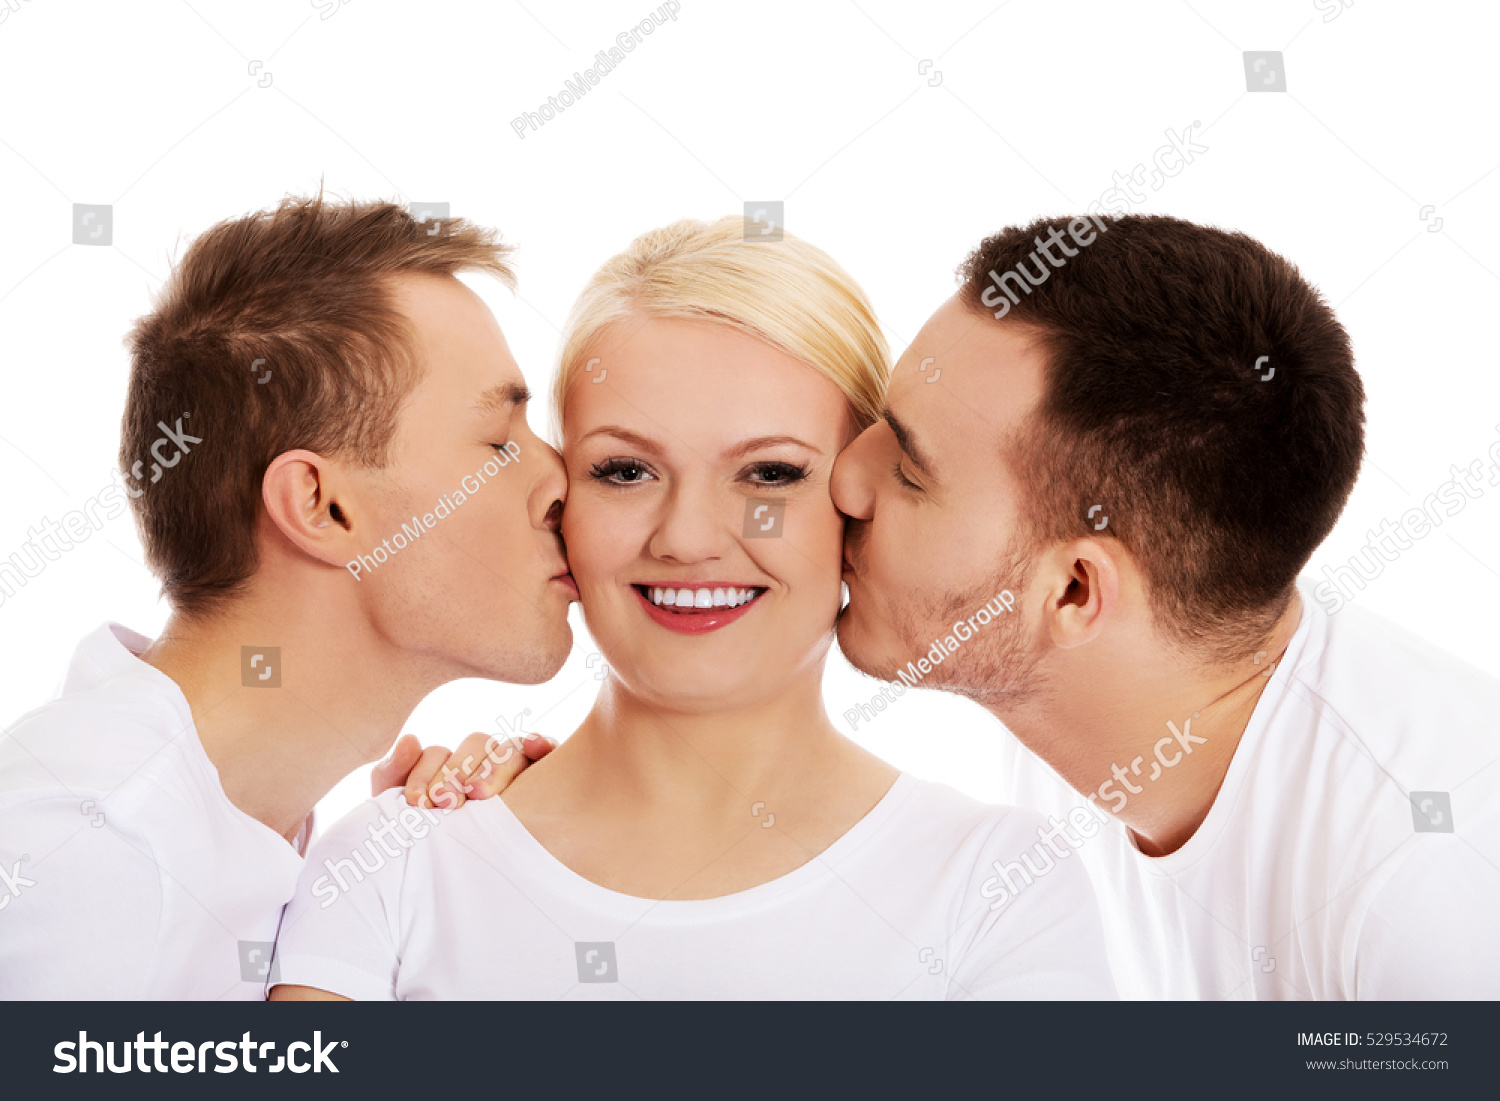 alexandra feo recommends 2 guys making out pic